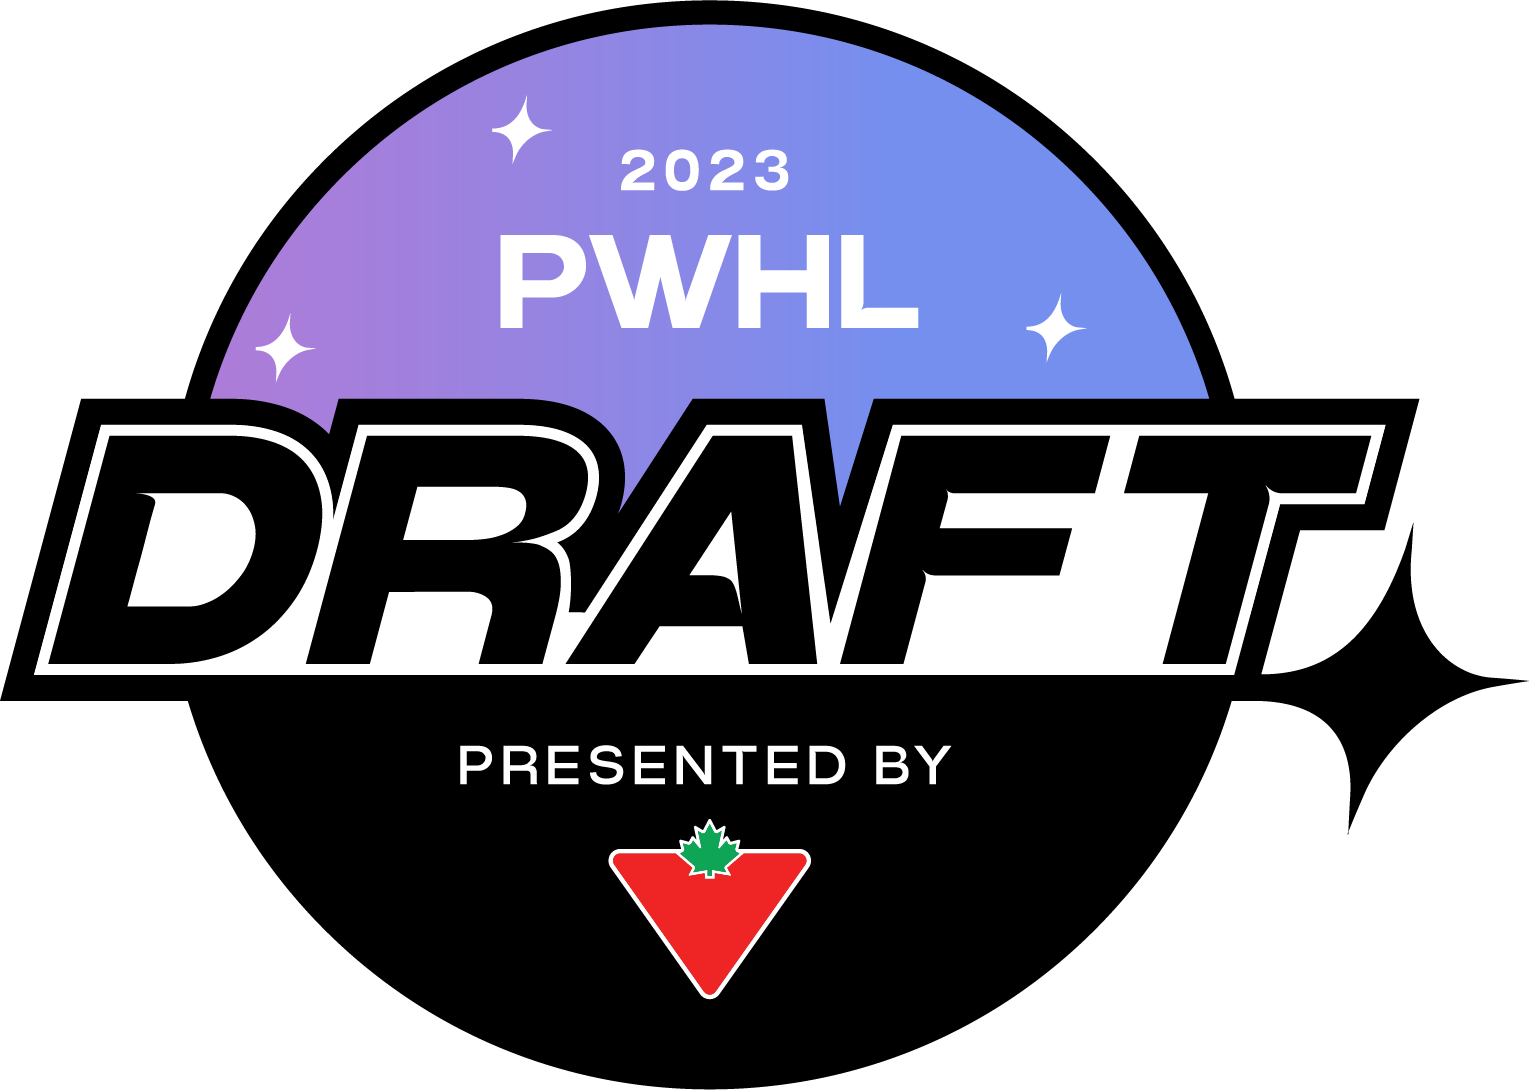 Professional Women's Hockey League Draft Set for Monday, 268 Eligible Players Available